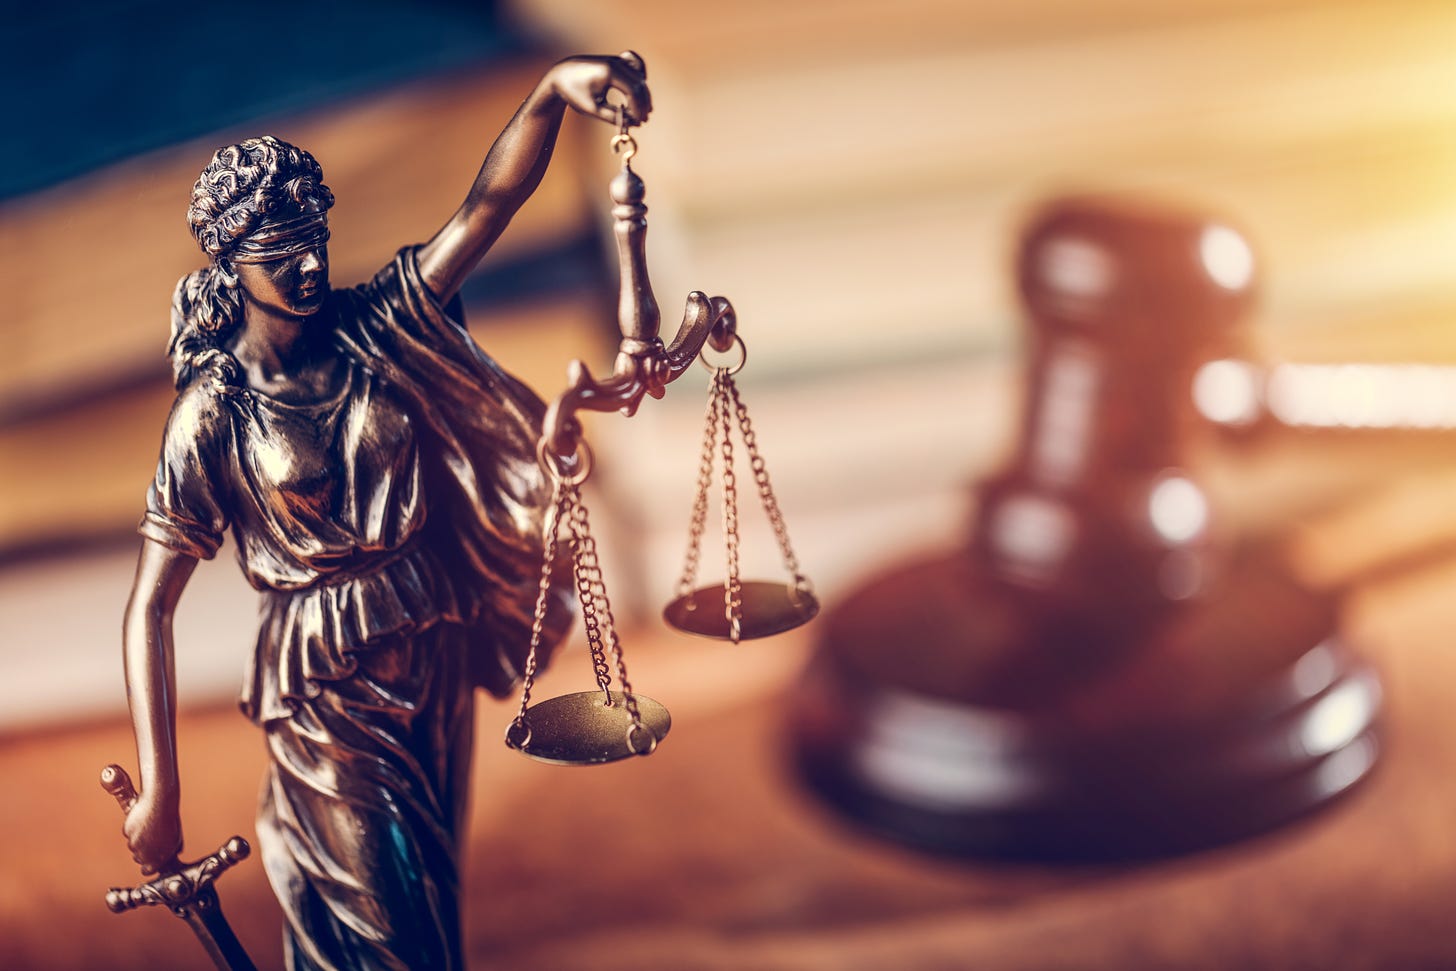 Image contains Lady Justice/Themis statue in the foreground, made of bronze.  She's holding up the scales of justice in her left hand, and her right hand is at her side, holding her sword.  The background is blurred and contains a judge's gavel and old law books with black covers.